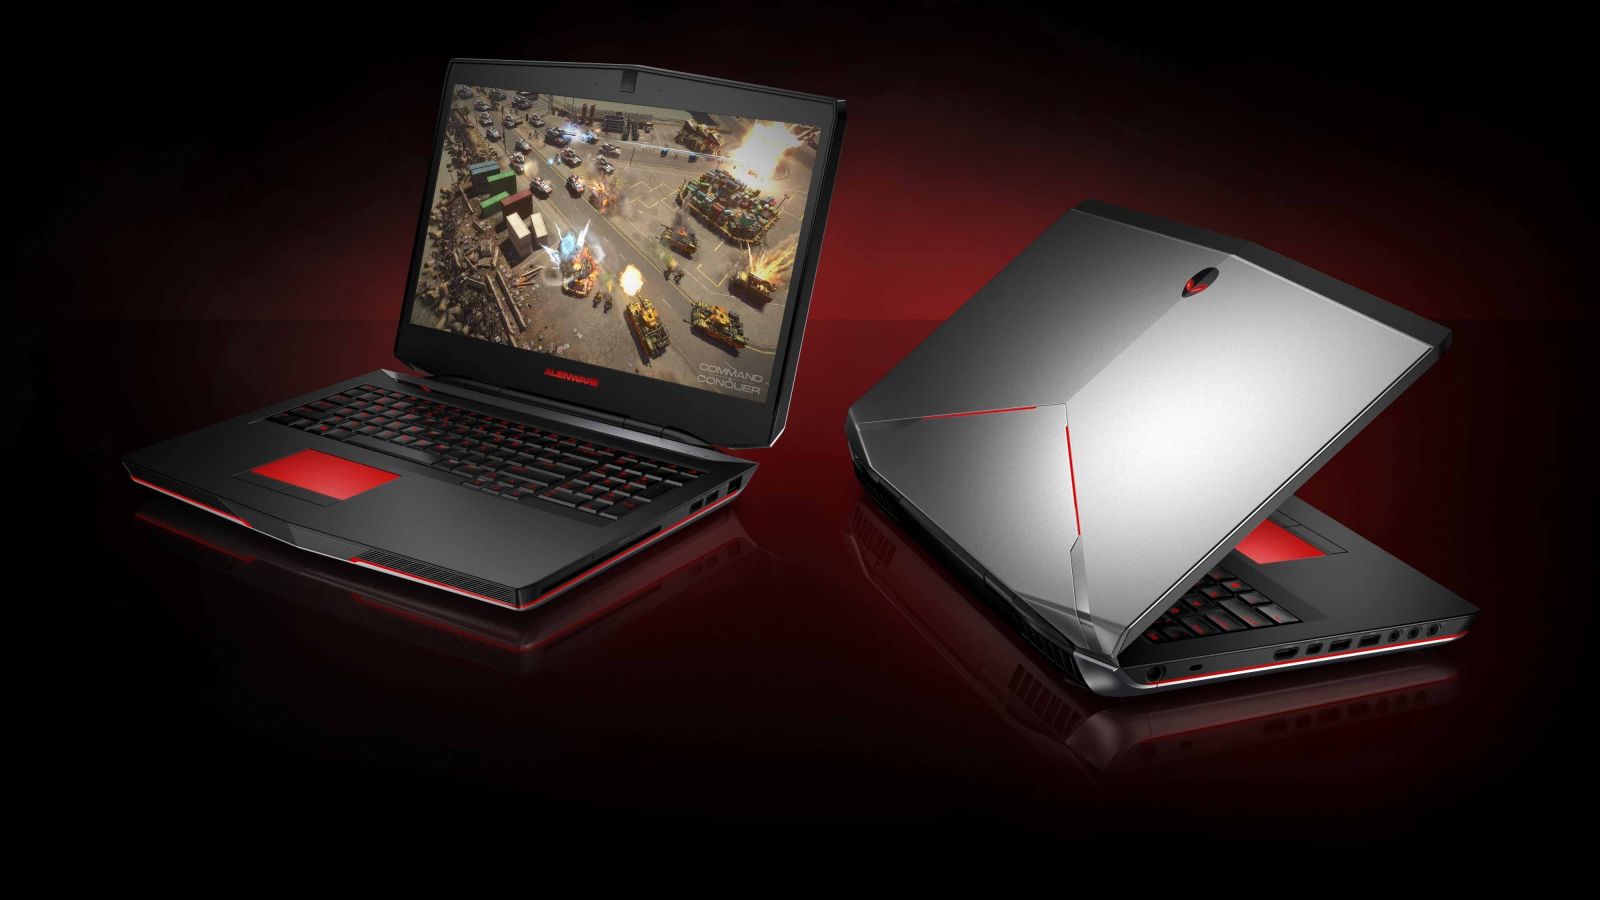 Alienware launches VR-ready laptops